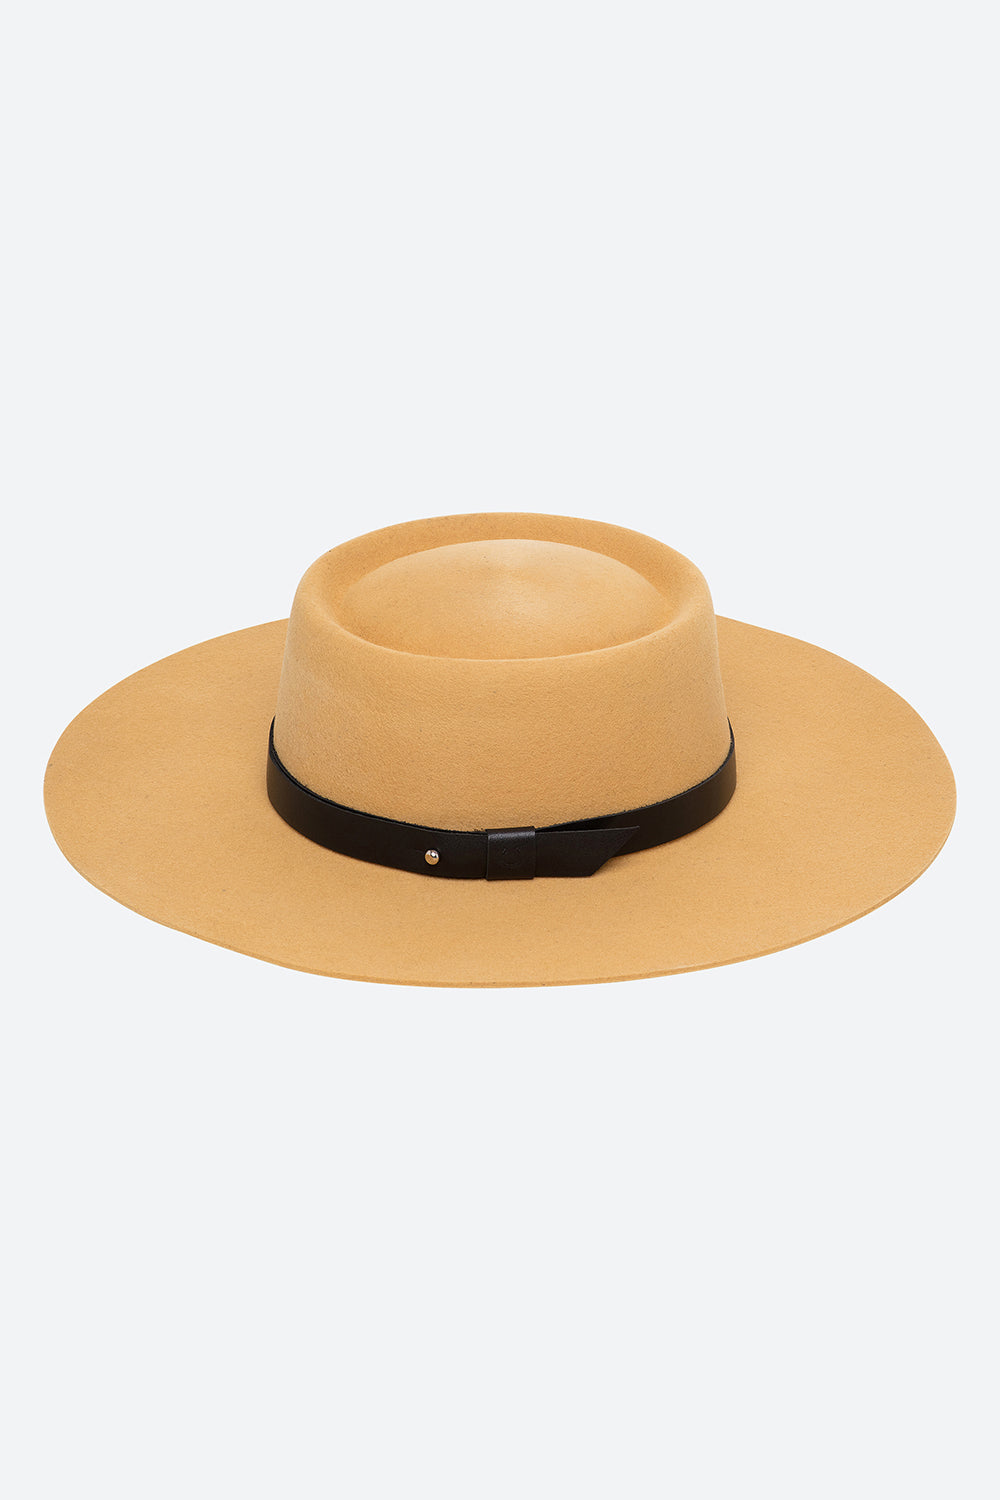 Quintana 10M Hat in Sand